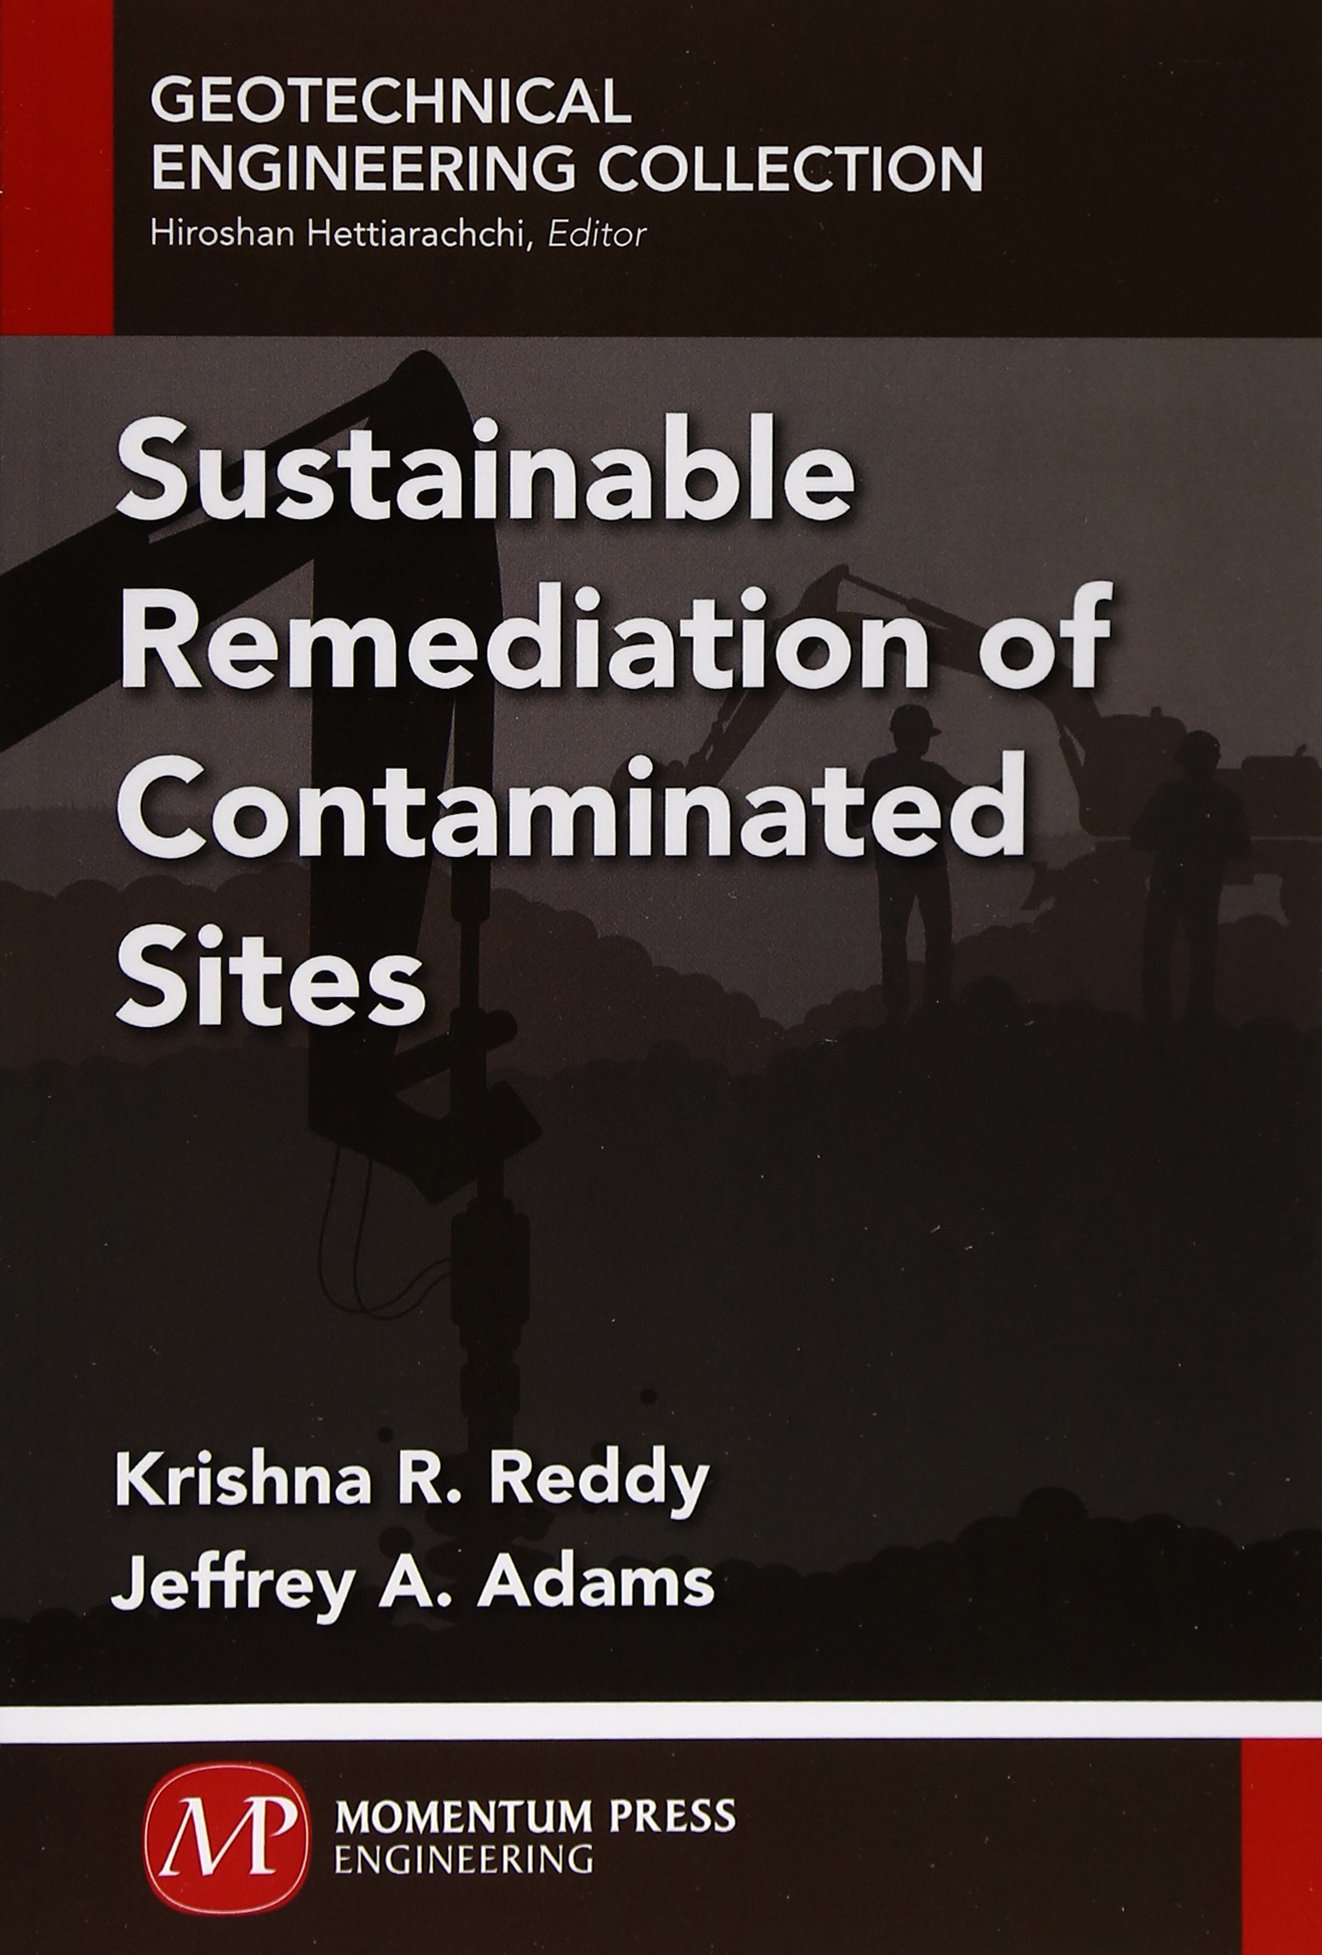 Sustainable Remediation of Contaminated Sites (Geotechnical Engineering Collection)